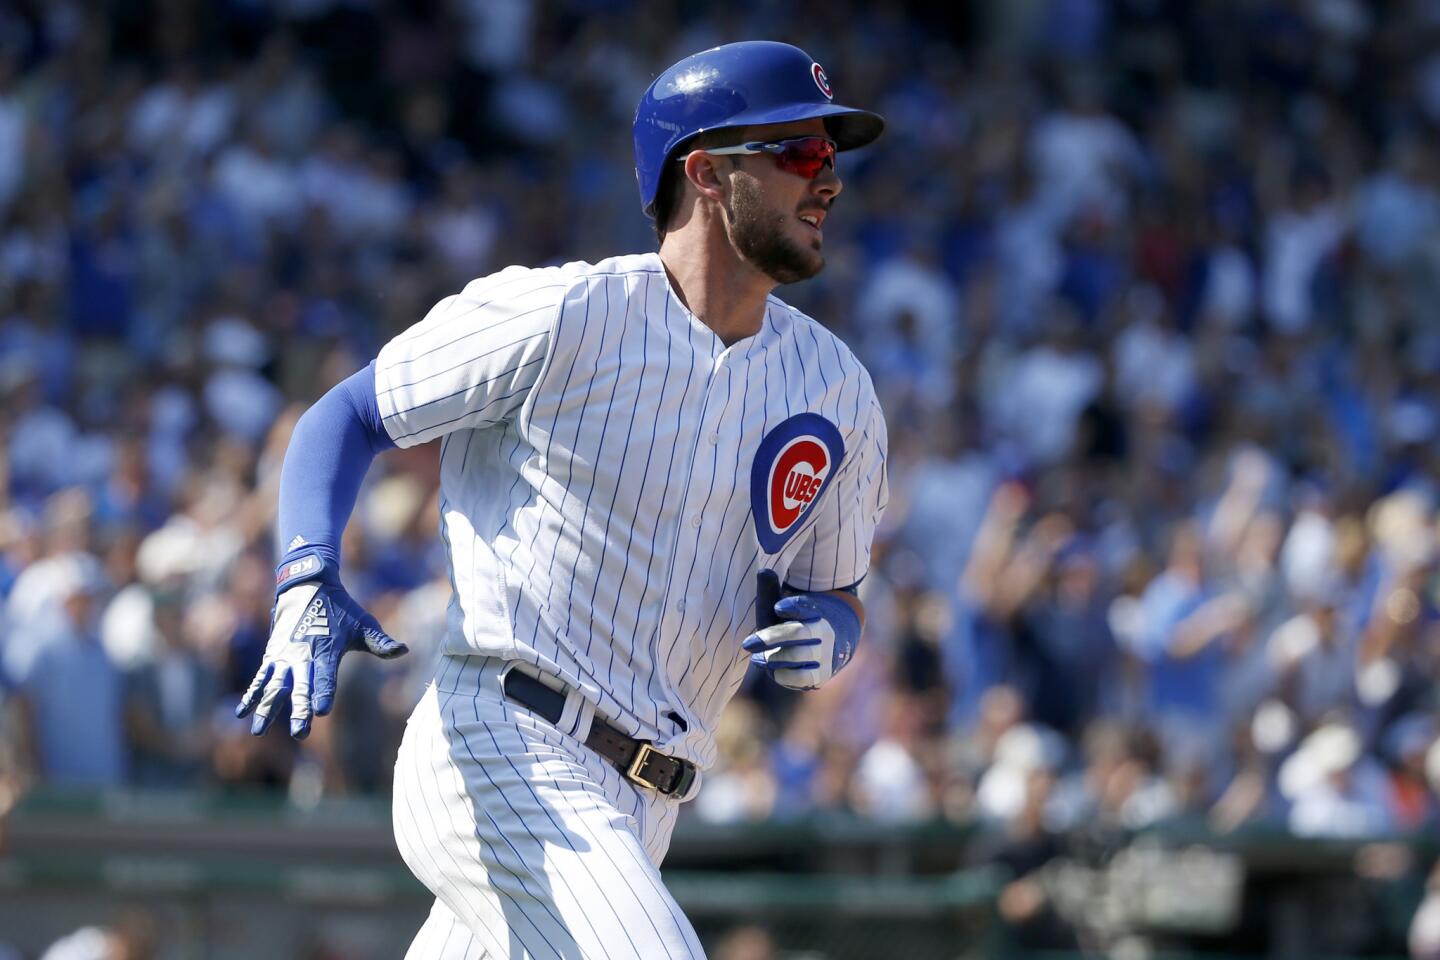 Cubs' Kris Bryant exits game after hit by pitch vs. Cleveland with